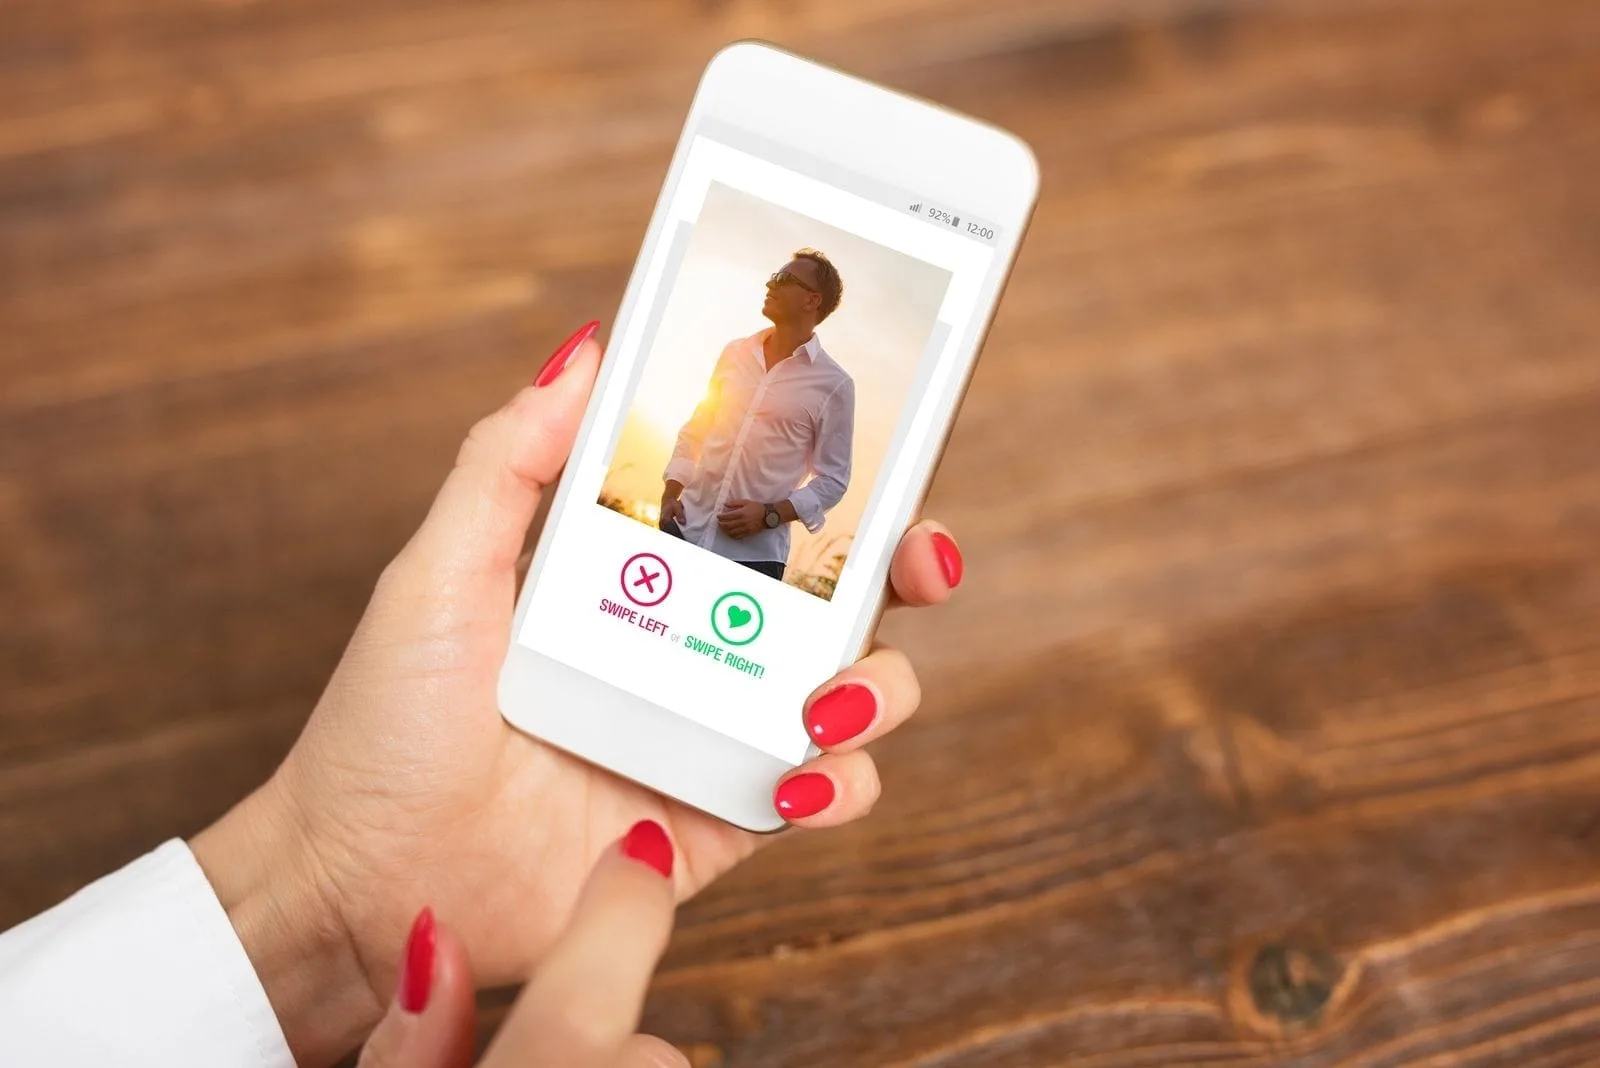 cropped hand of a woman holding a smartphone with a picture of a man in a dating app